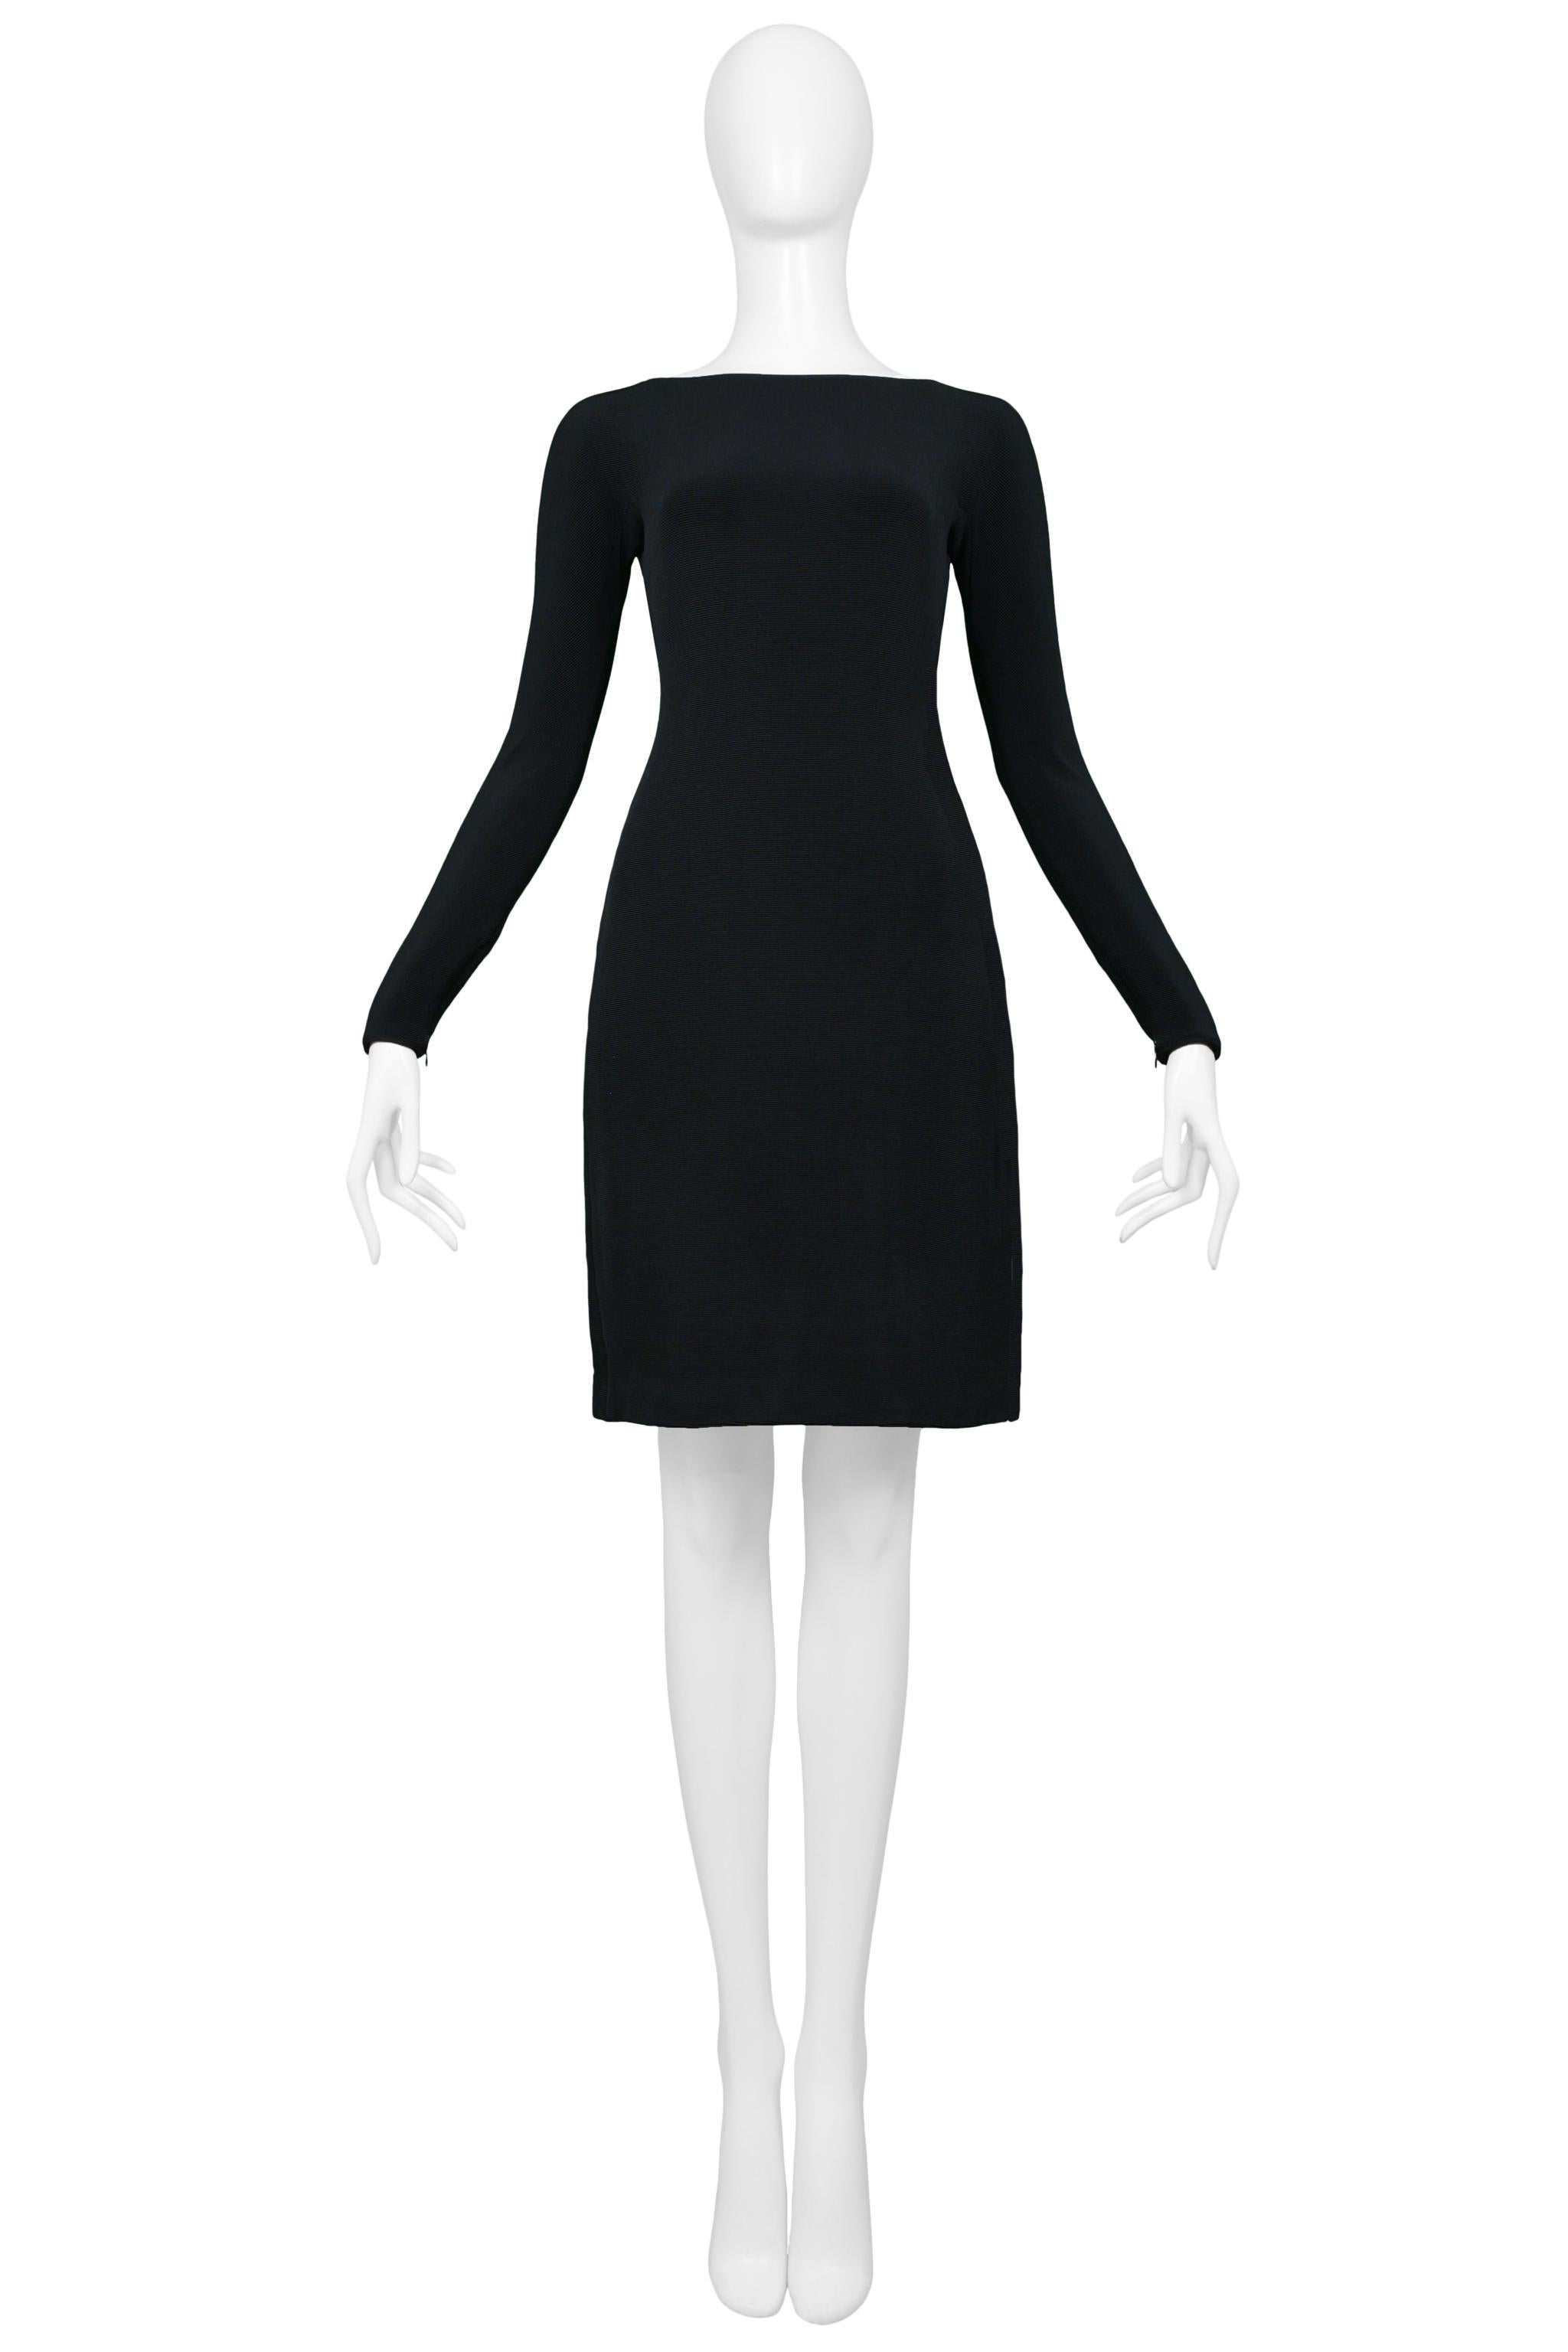 Resurrection Vintage is excited to offer a vintage black Gianni Versace bodycon mini cocktail dress featuring ribbed fabric, long sleeves, Medusa button, cutout back, and above-the-knee length. 

Versace 
Size Label Missing - Approximately size 4-6